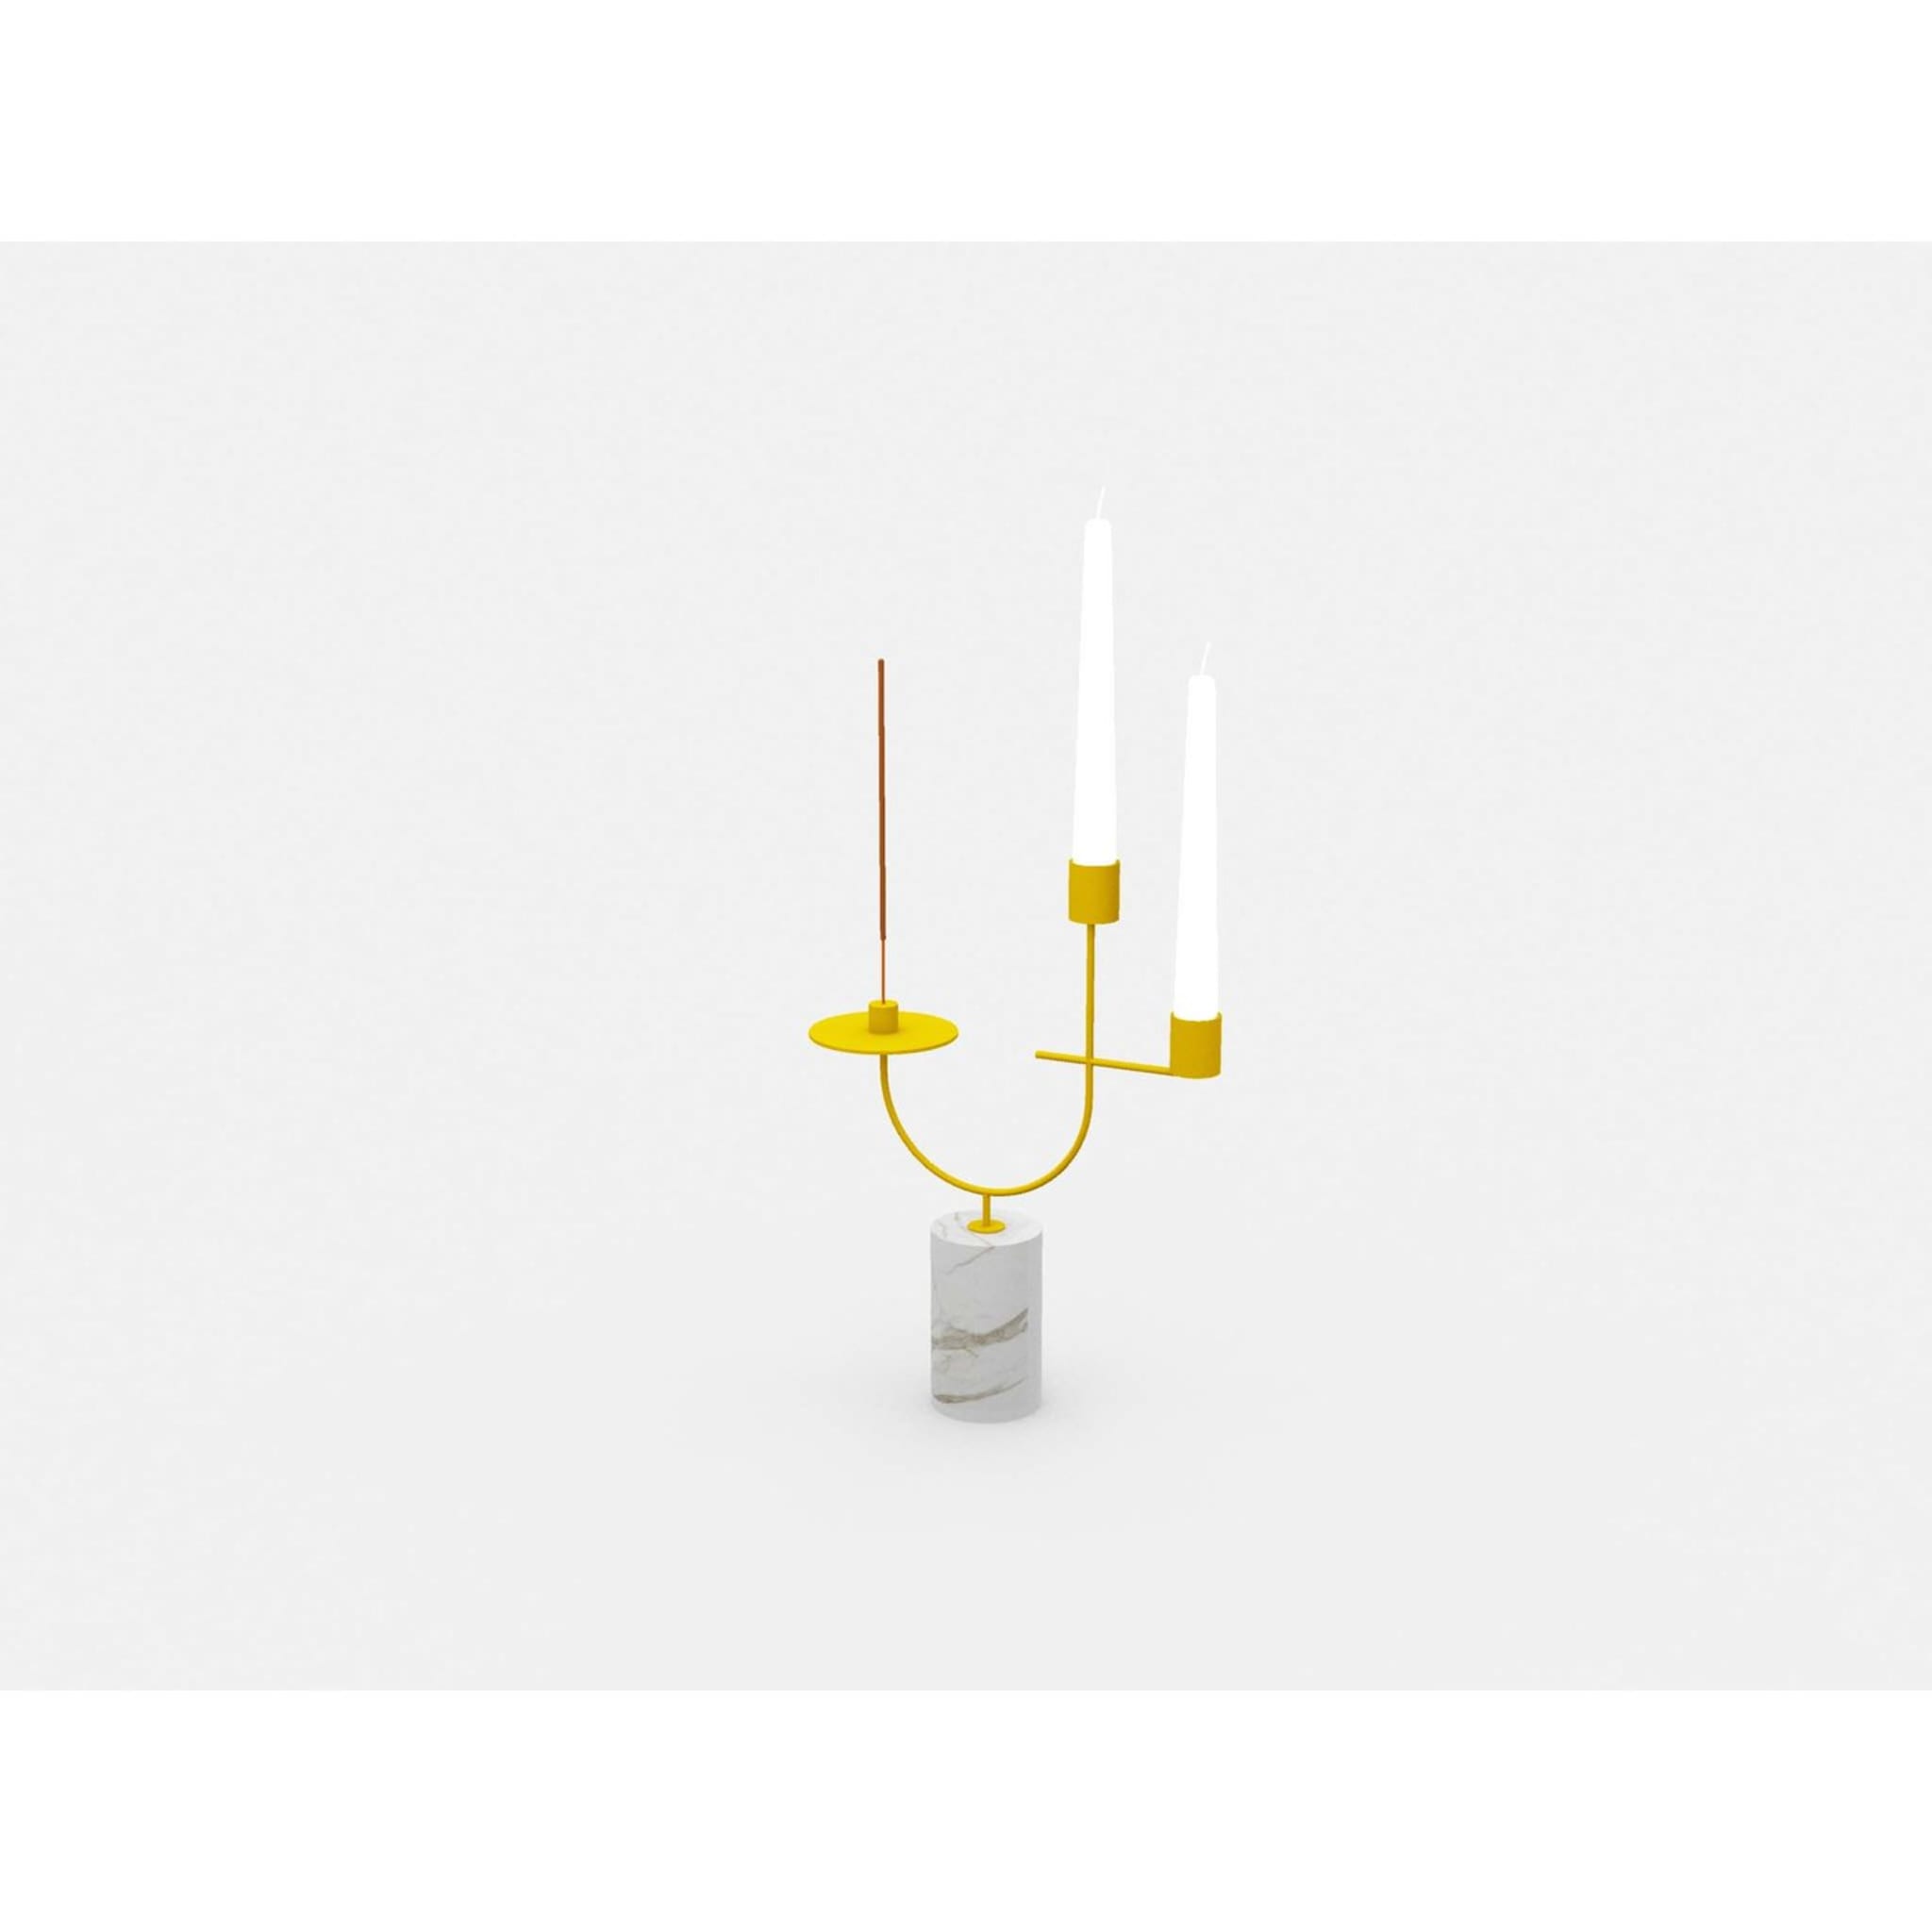 Equilibrista White Carrara and Yellow Candle and Incense Holder - Alternative view 1